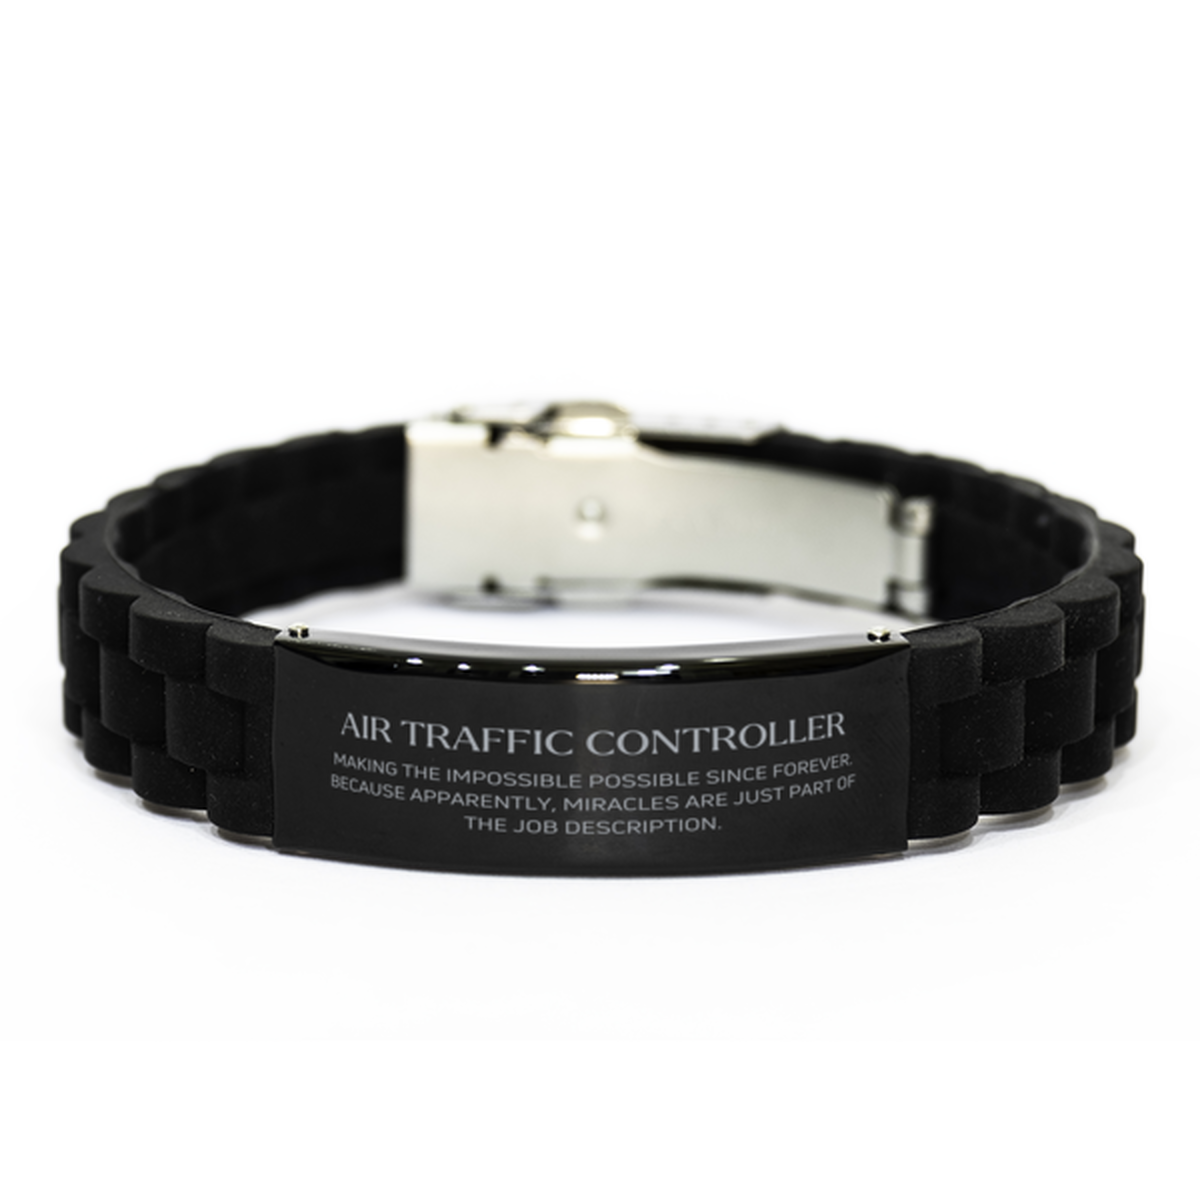 Funny Air Traffic Controller Gifts, Miracles are just part of the job description, Inspirational Birthday Black Glidelock Clasp Bracelet For Air Traffic Controller, Men, Women, Coworkers, Friends, Boss